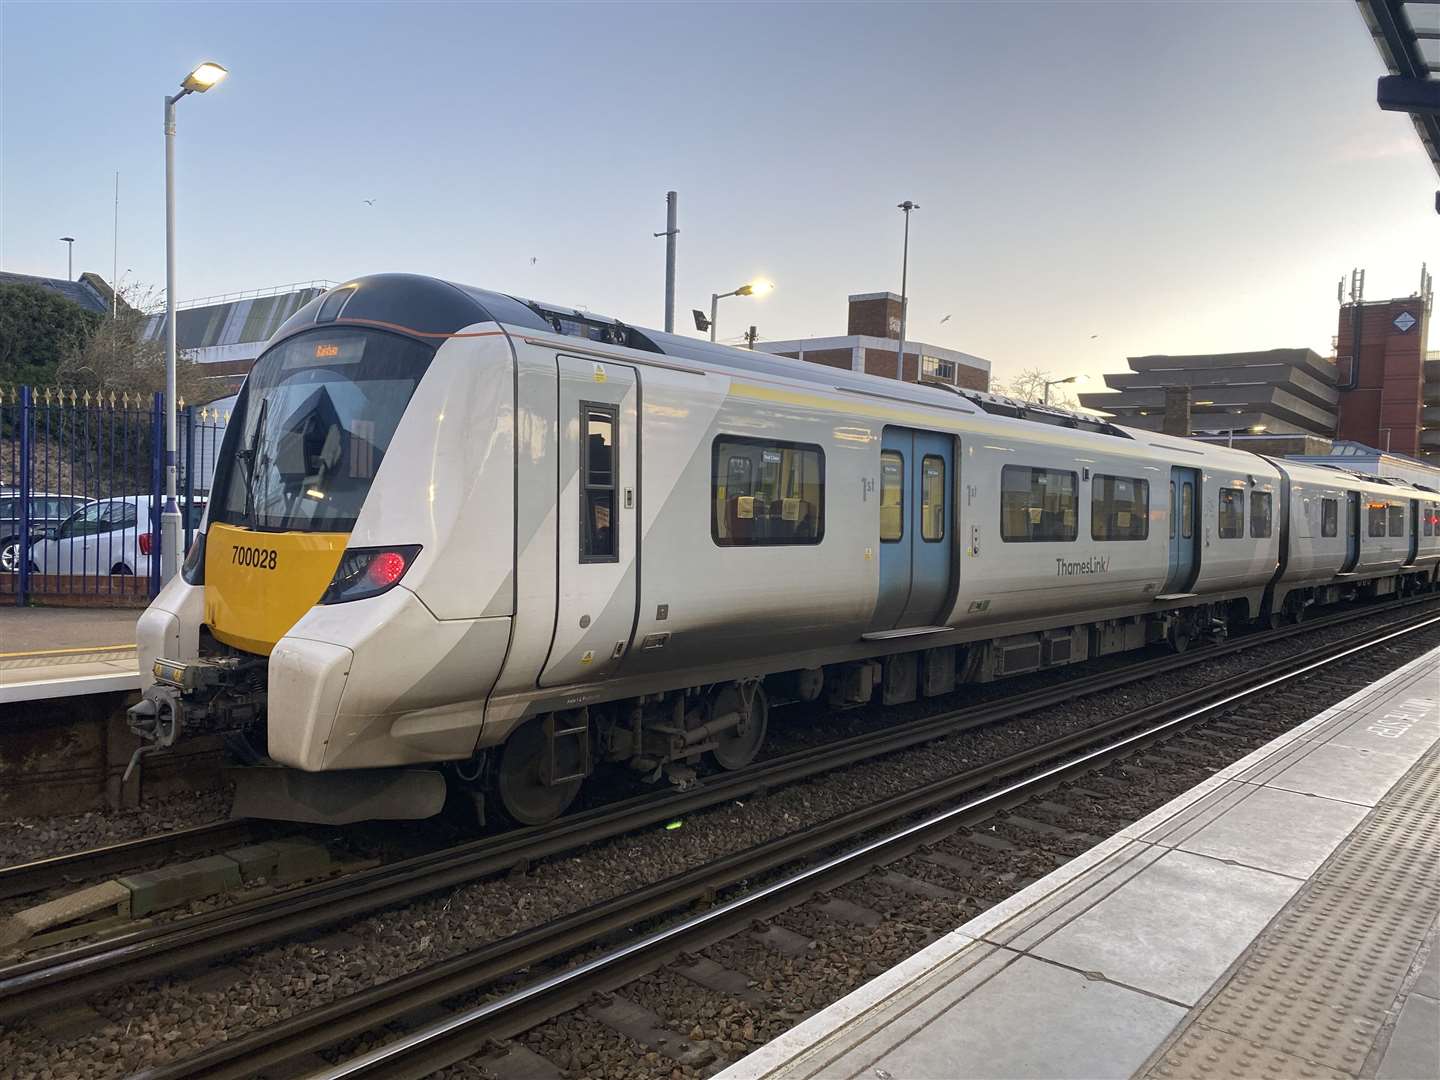 The group were reportedly travelling on a Thameslink service and left the train at Higham. Stock picture